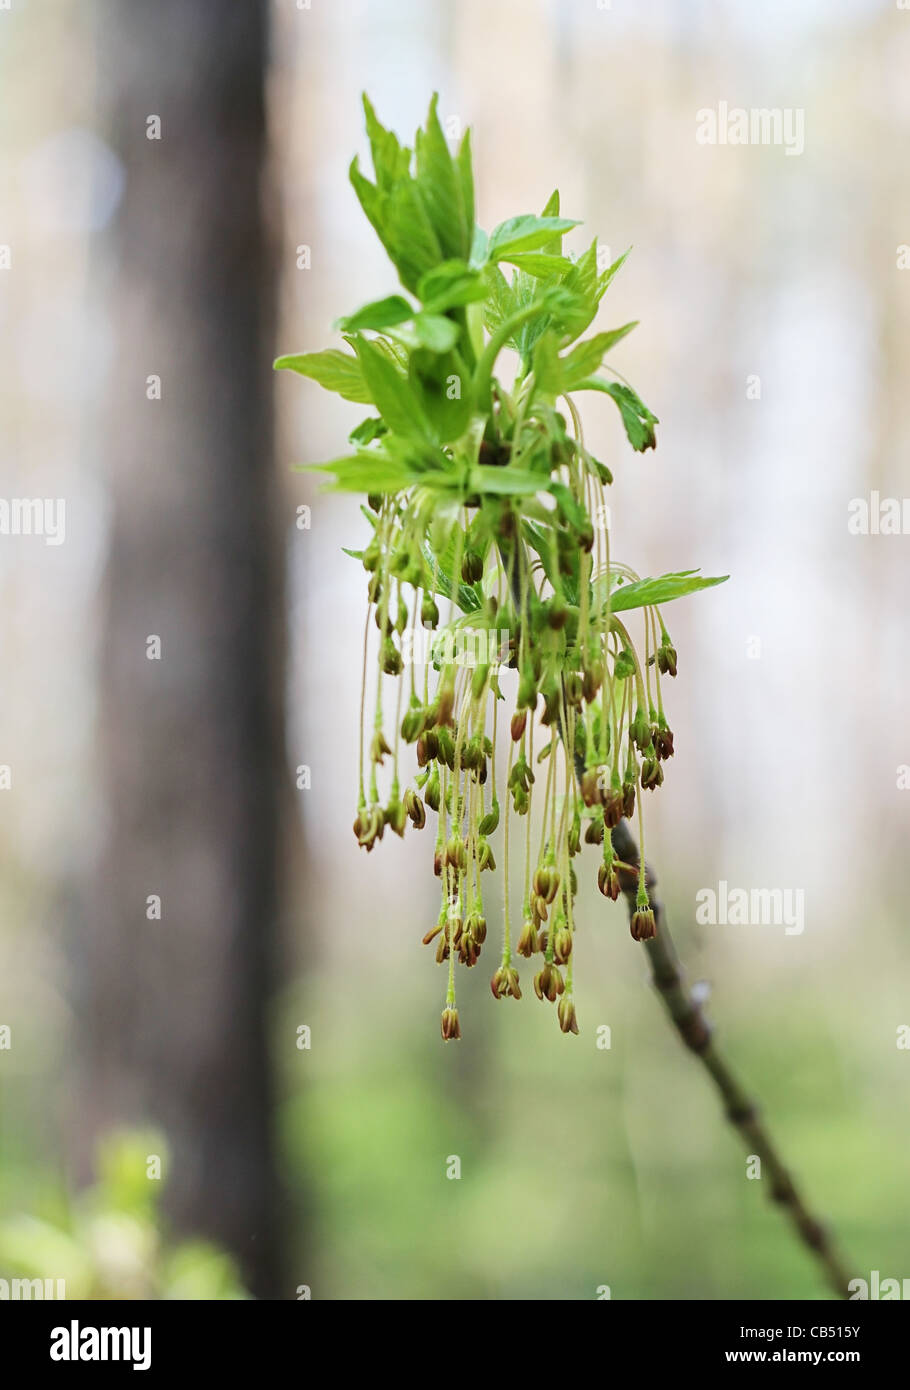 ash tree bud with leaves and flowers Stock Photo